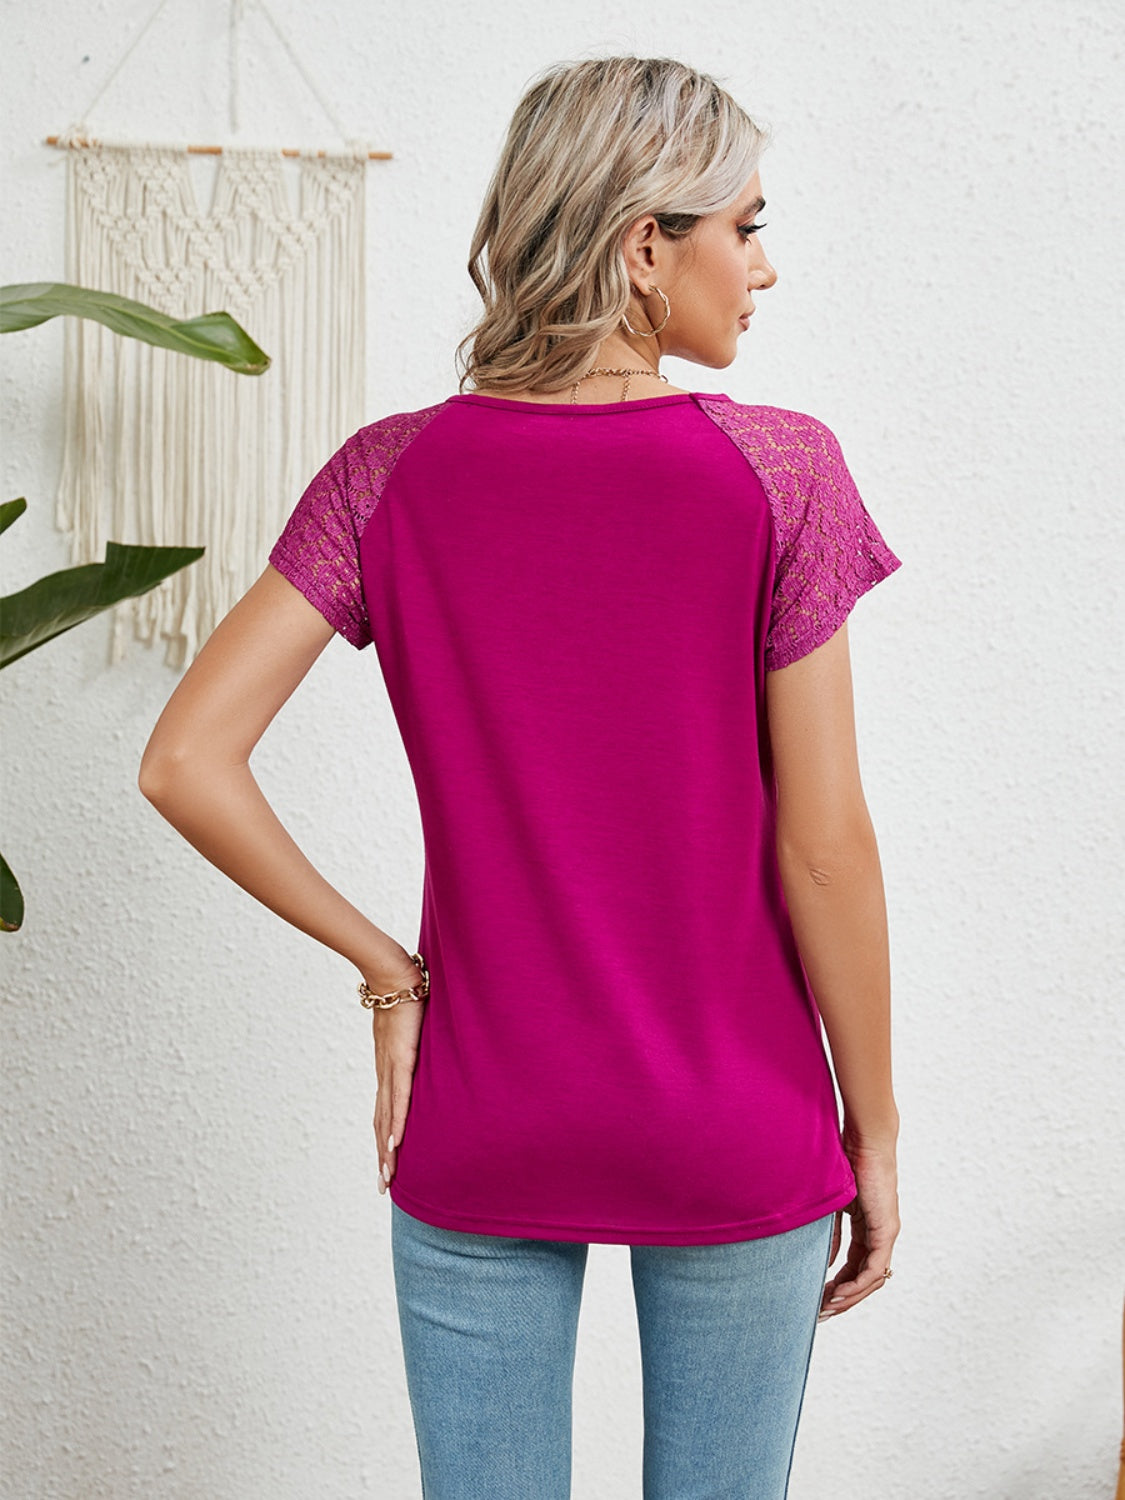 PREORDER- Lace Detail Round Neck Short Sleeve T-Shirt